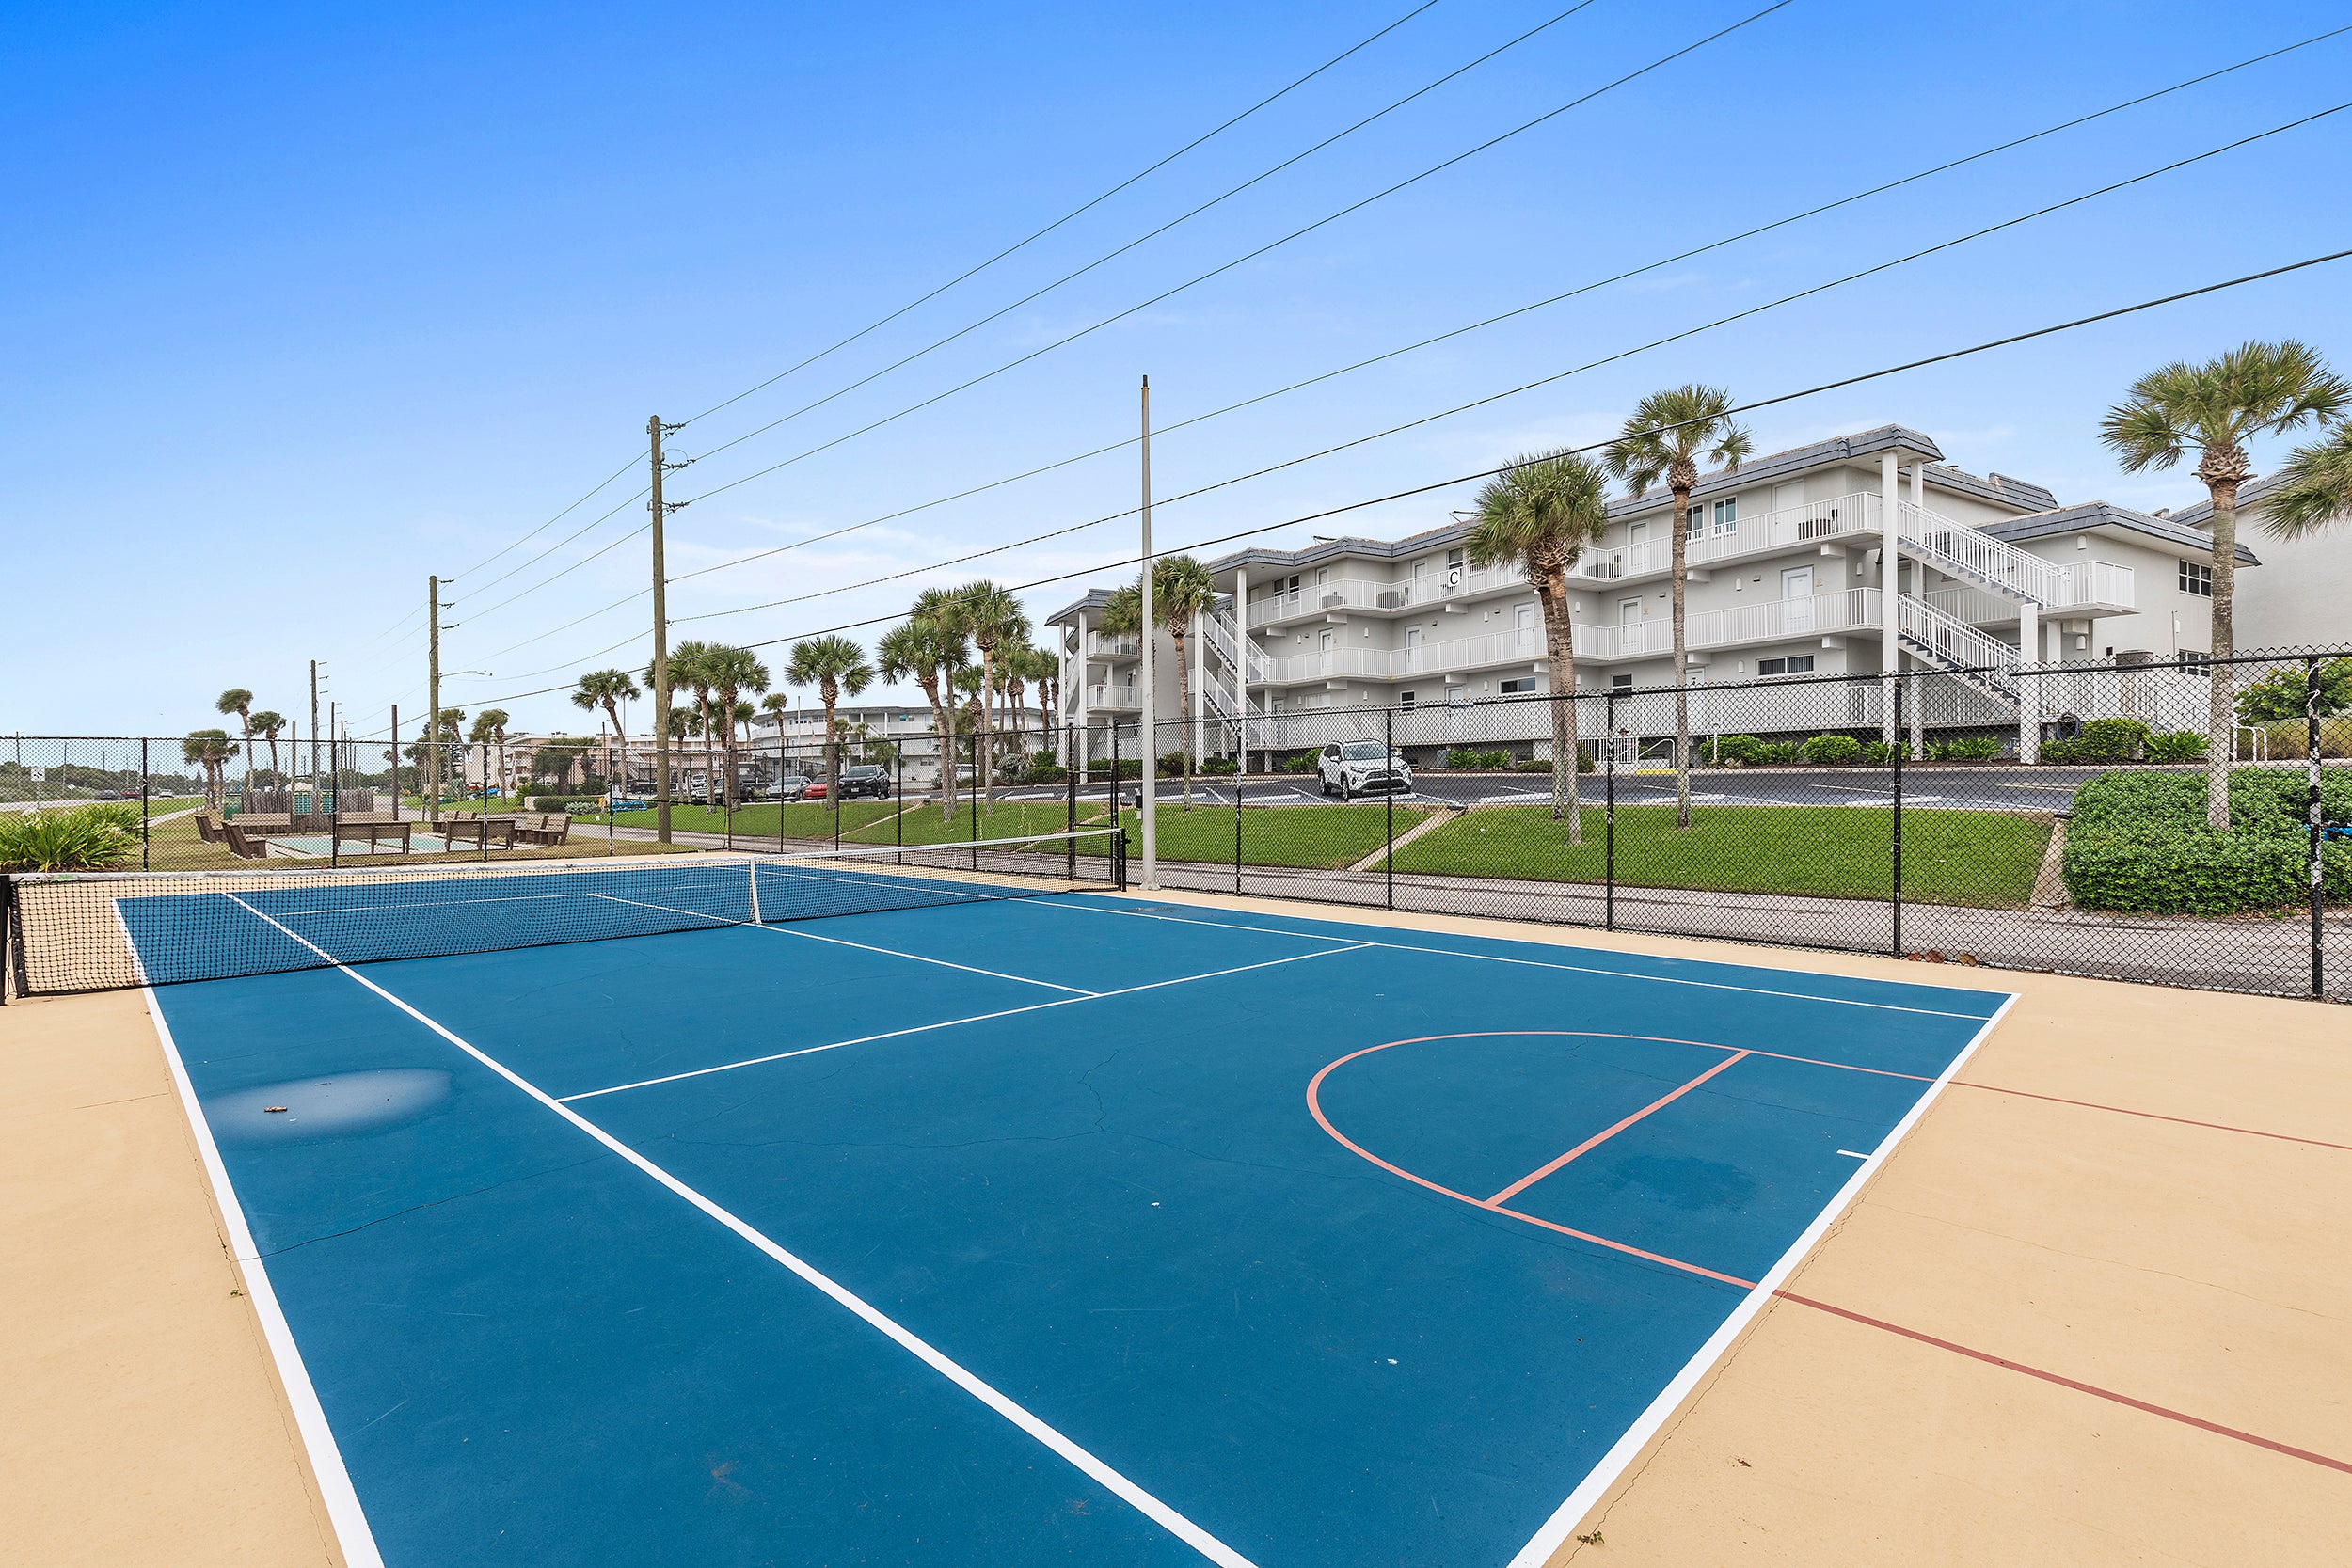 Tennis Court and Basketball court